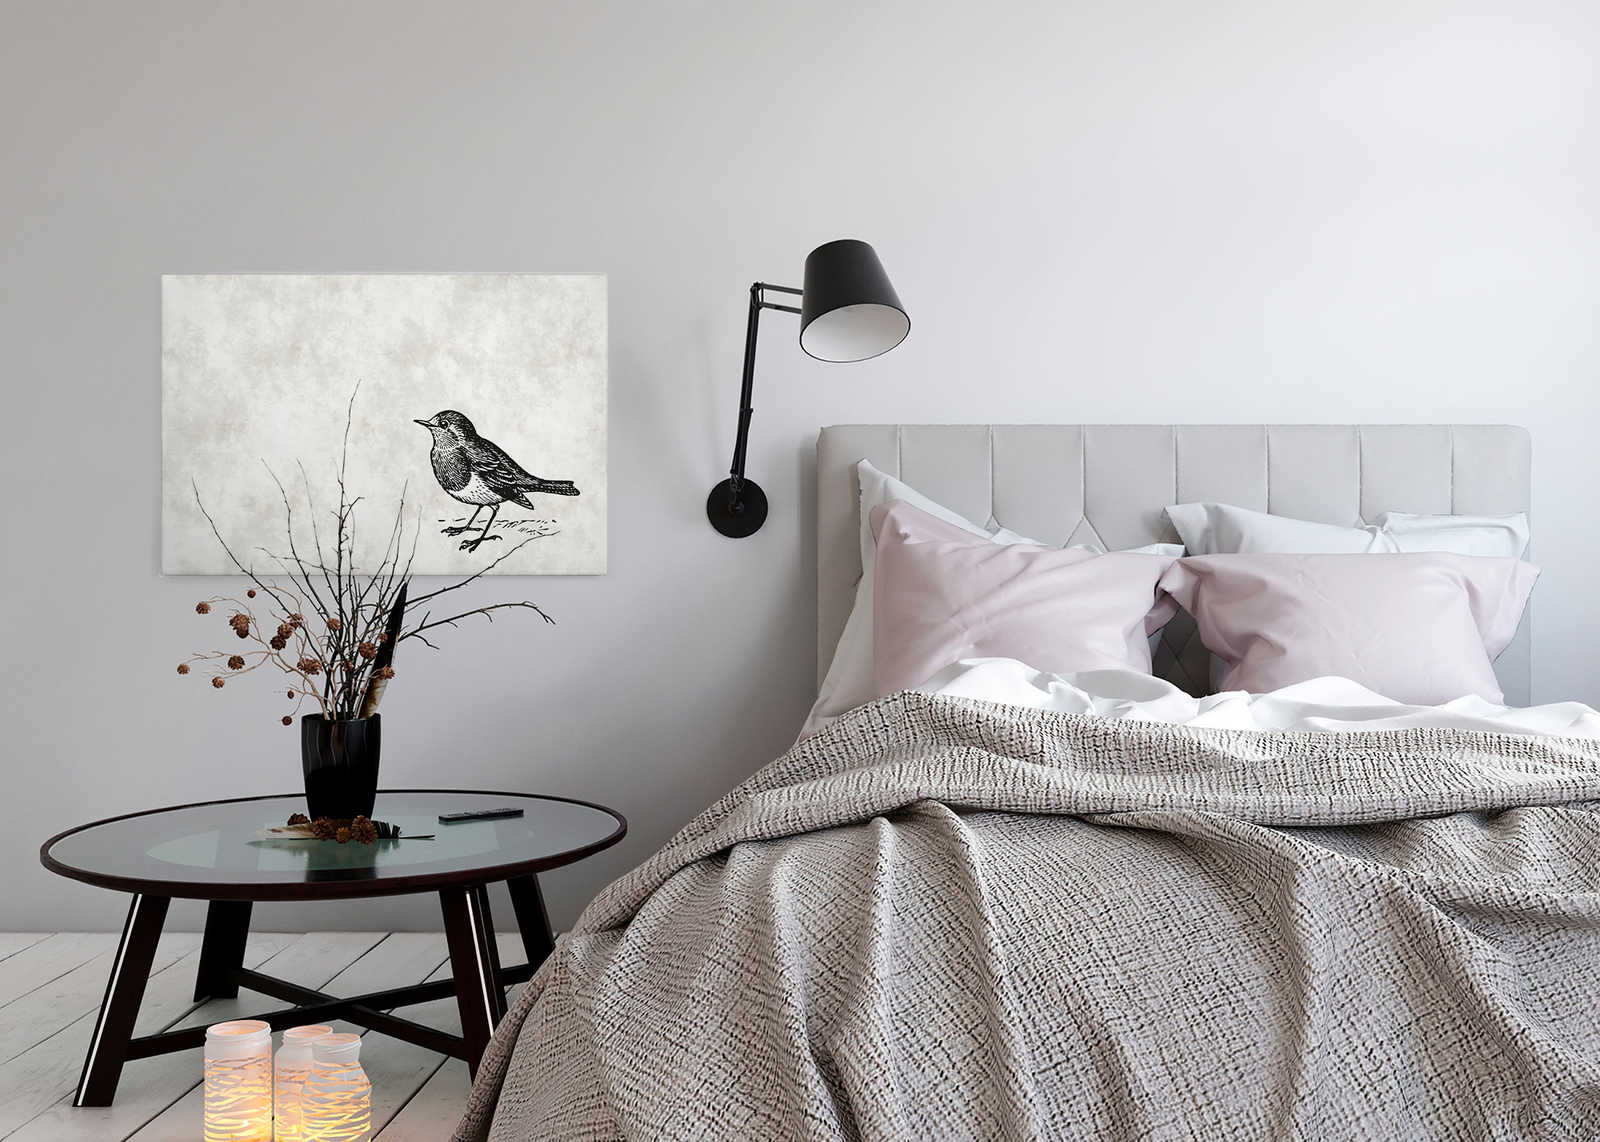             Black and White Canvas Painting with Bird - 0.90 m x 0.60 m
        